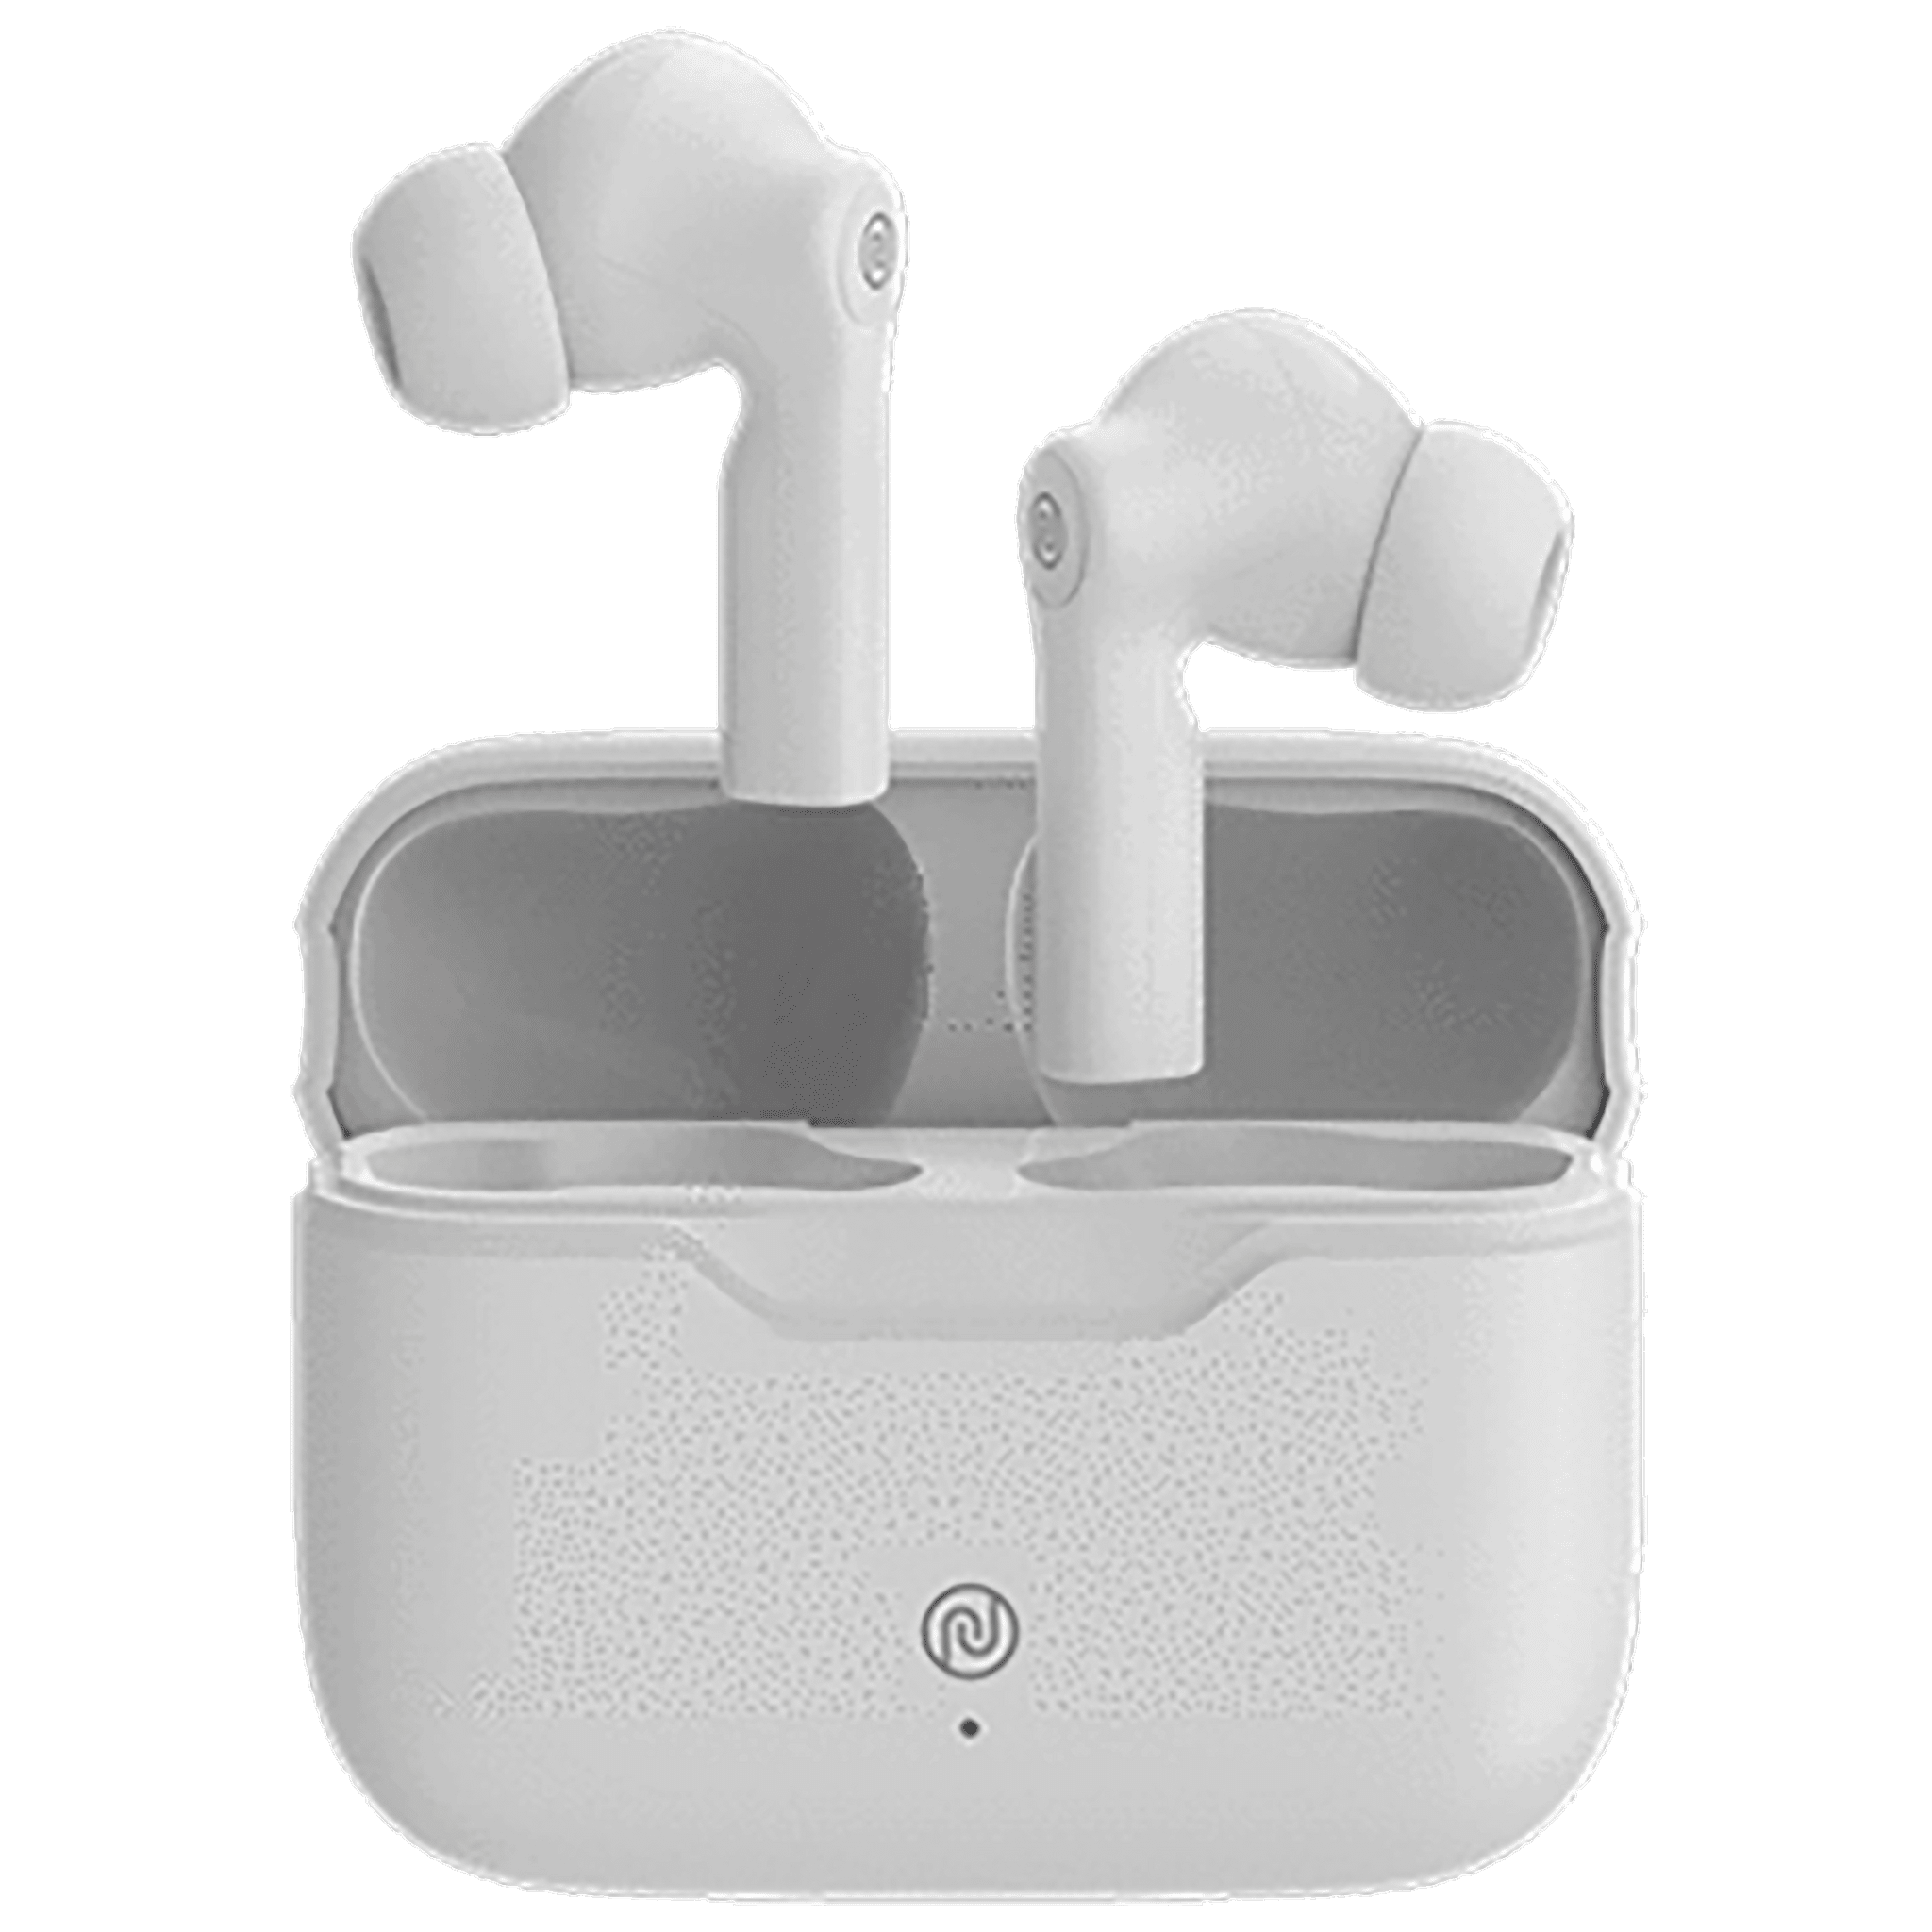 Noise Buds Smart AUD-HDPHN-BUDSSMAR In-Ear Truly Wireless Earbuds with Mic